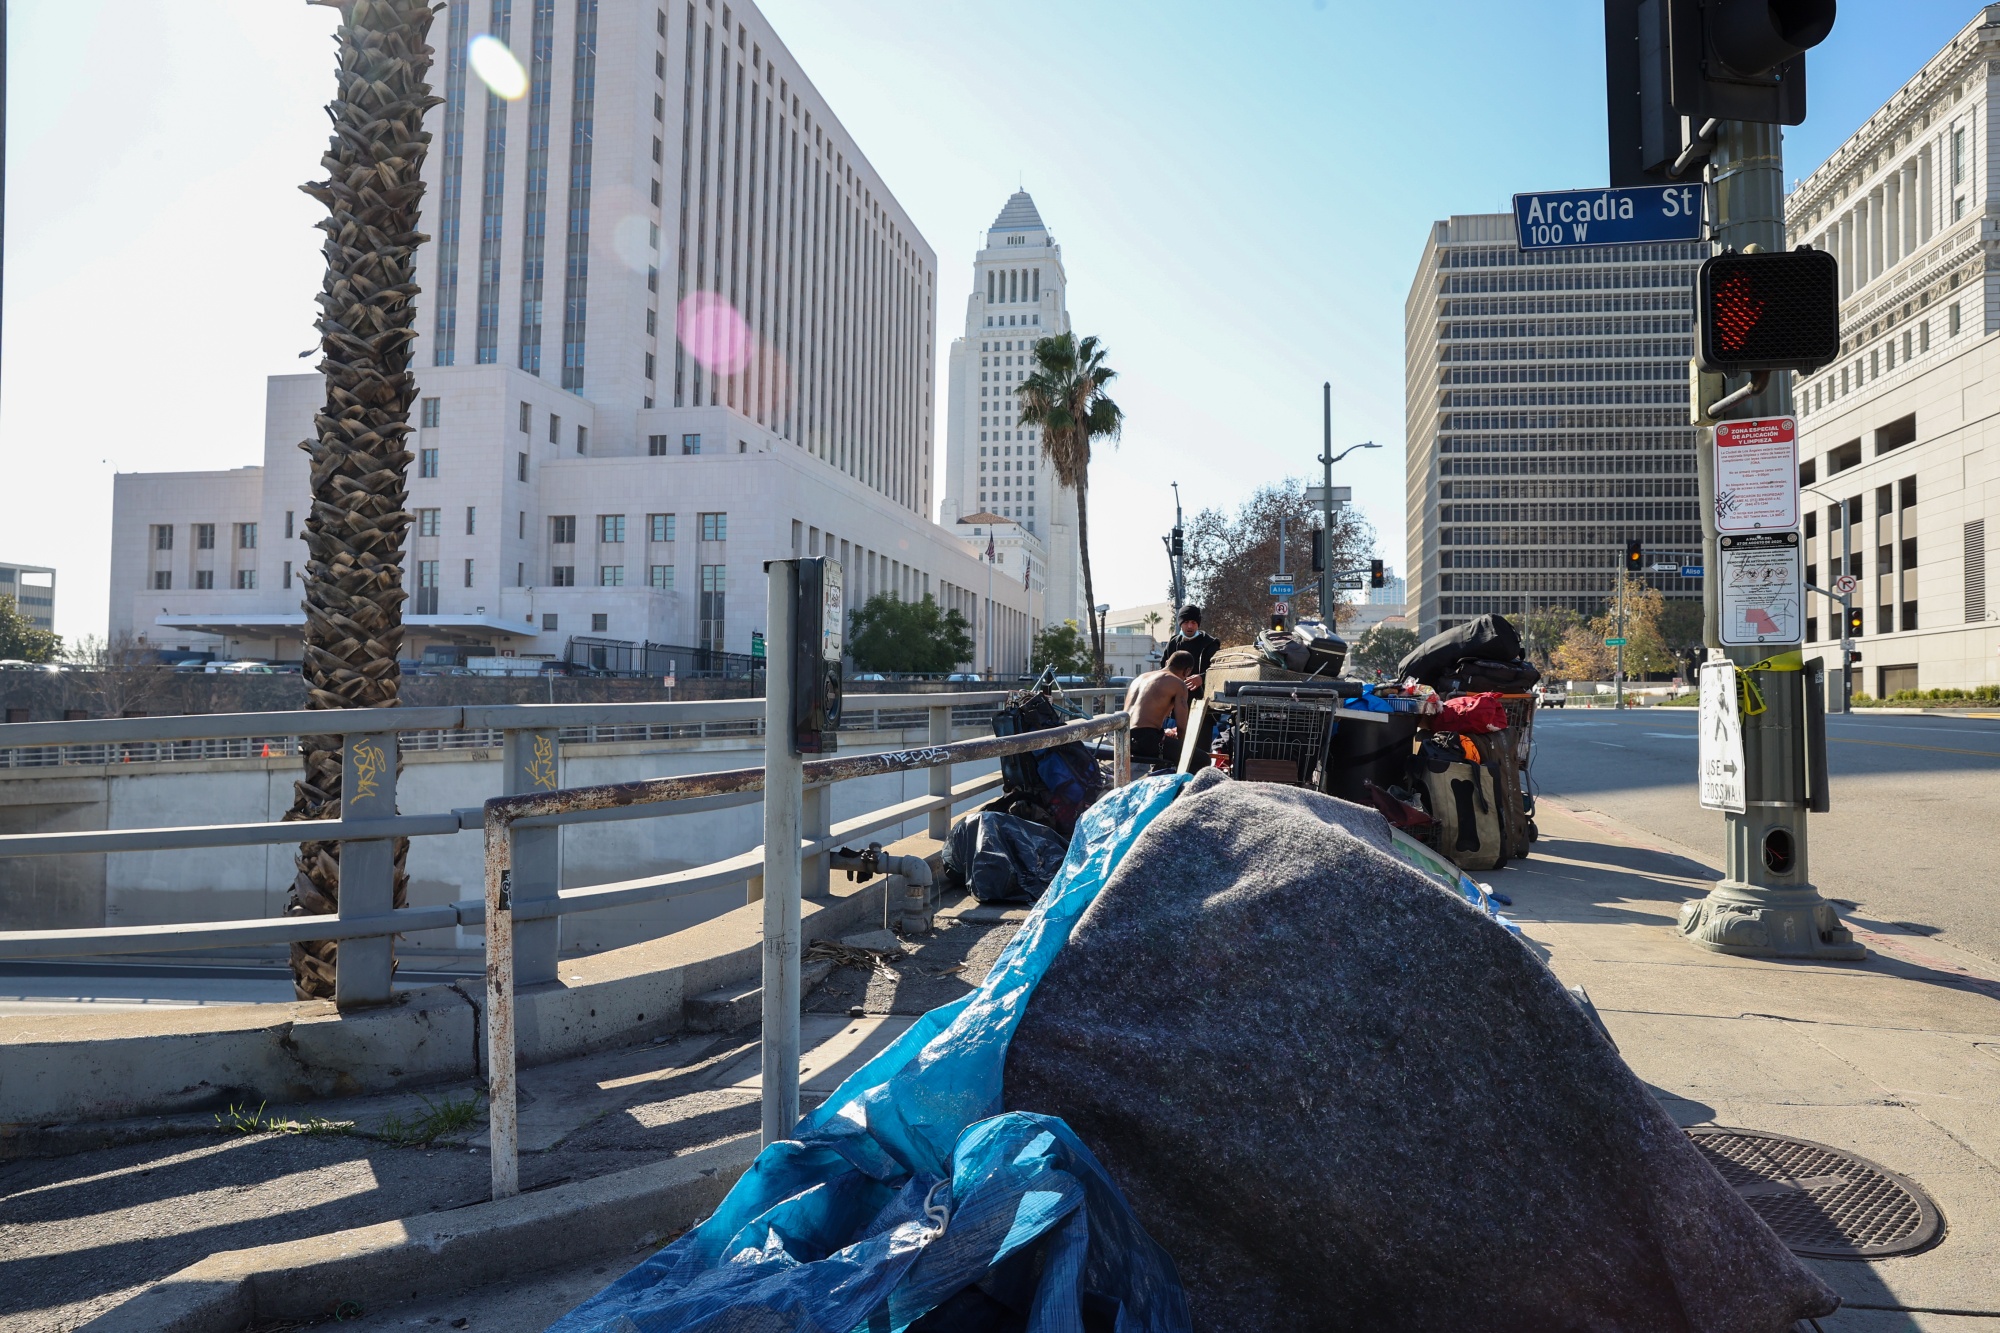 Tents line sidewalk&nbsp;near the City Hall in Los Angeles in December.&nbsp;With about 42,000 residents who are experiencing homelessness, the city has long struggled with the issue.&nbsp;